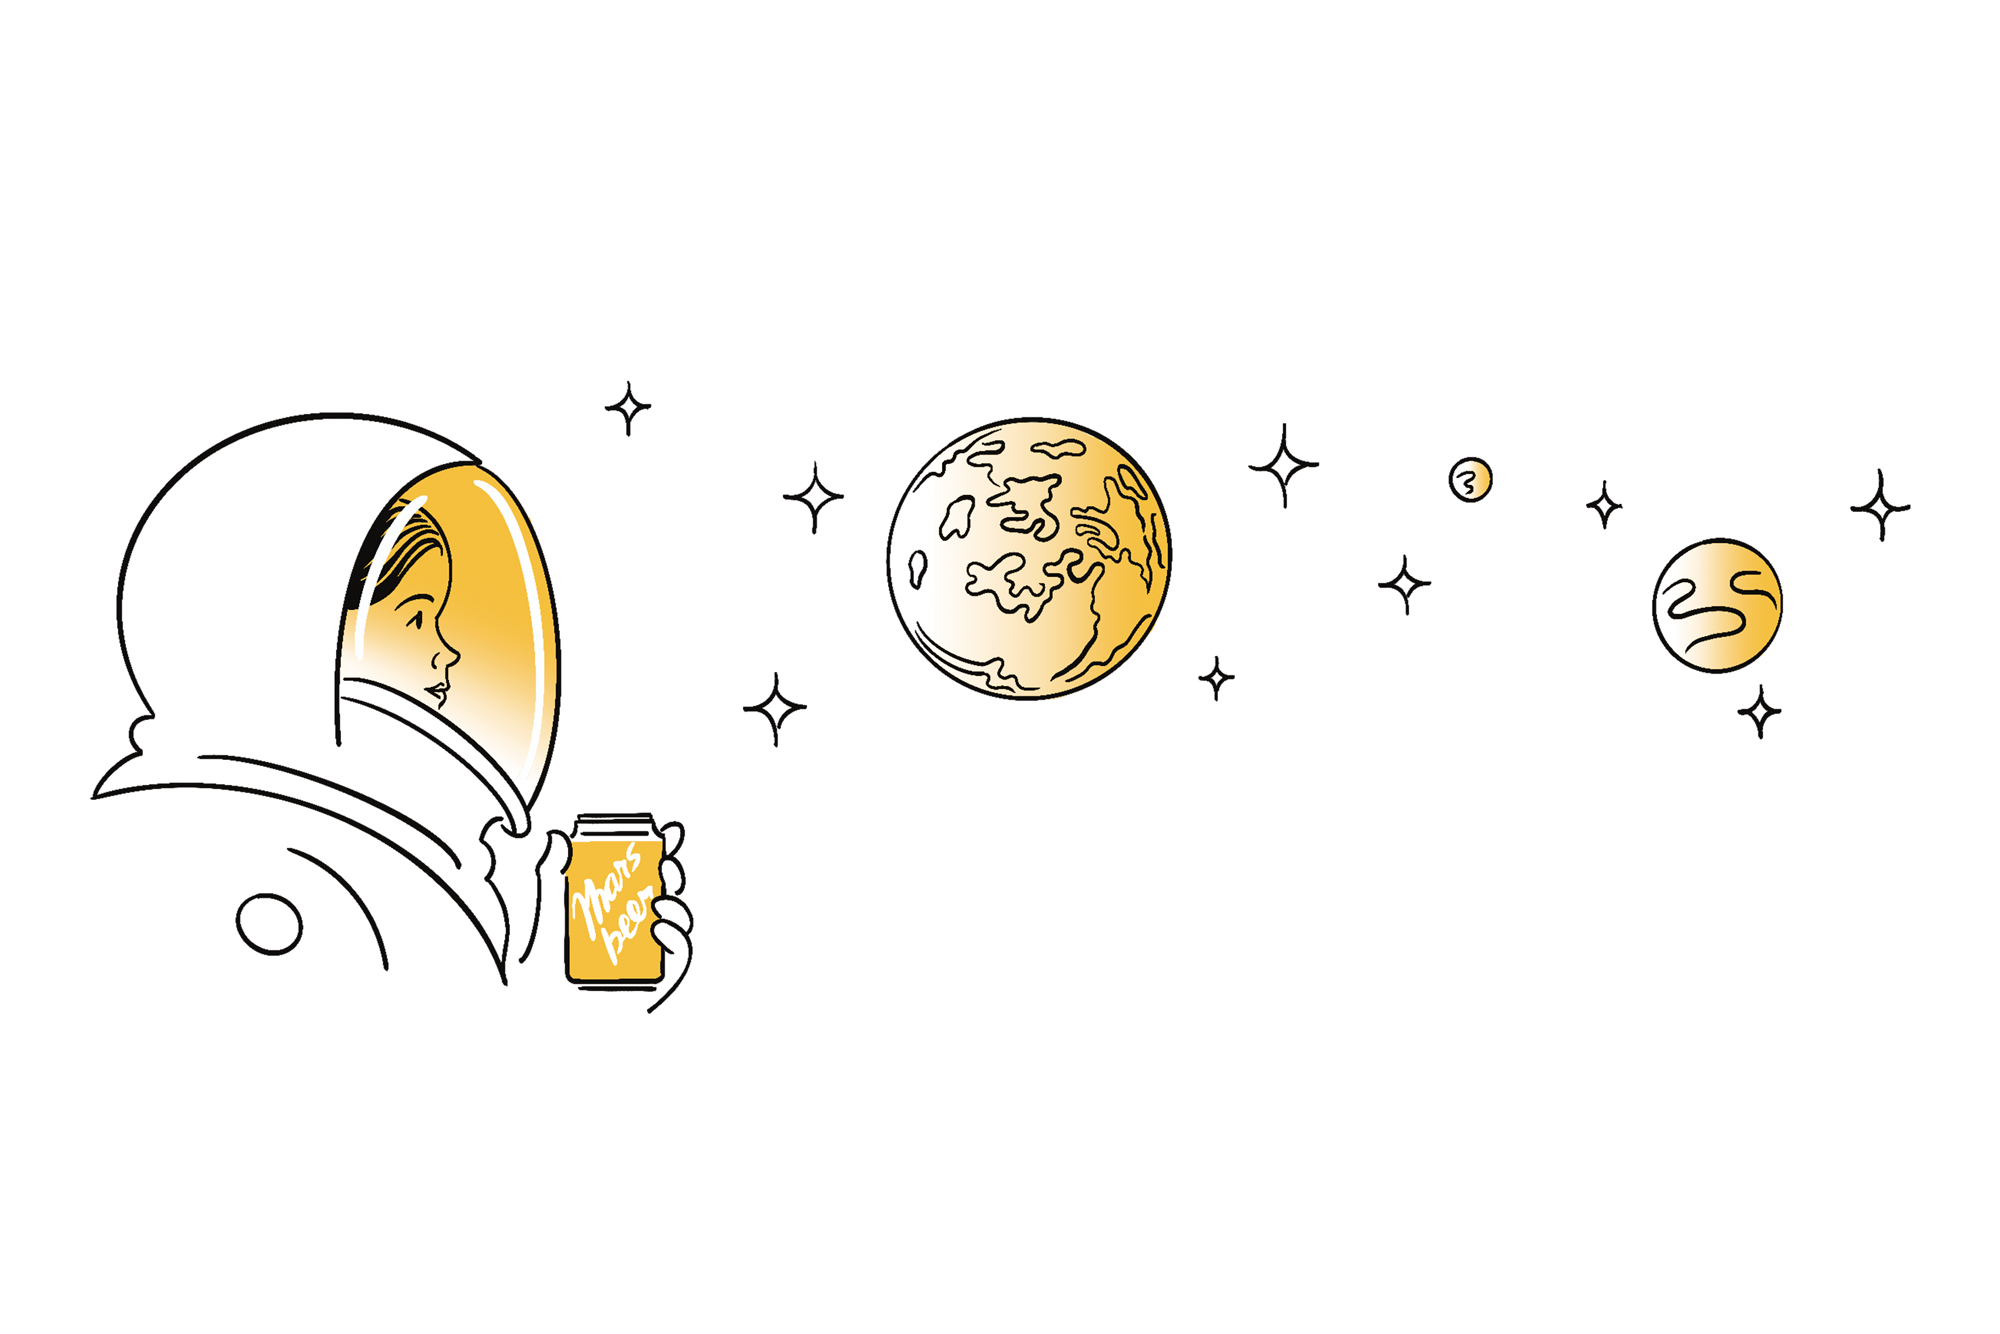 Can we brew our own beer on Mars?